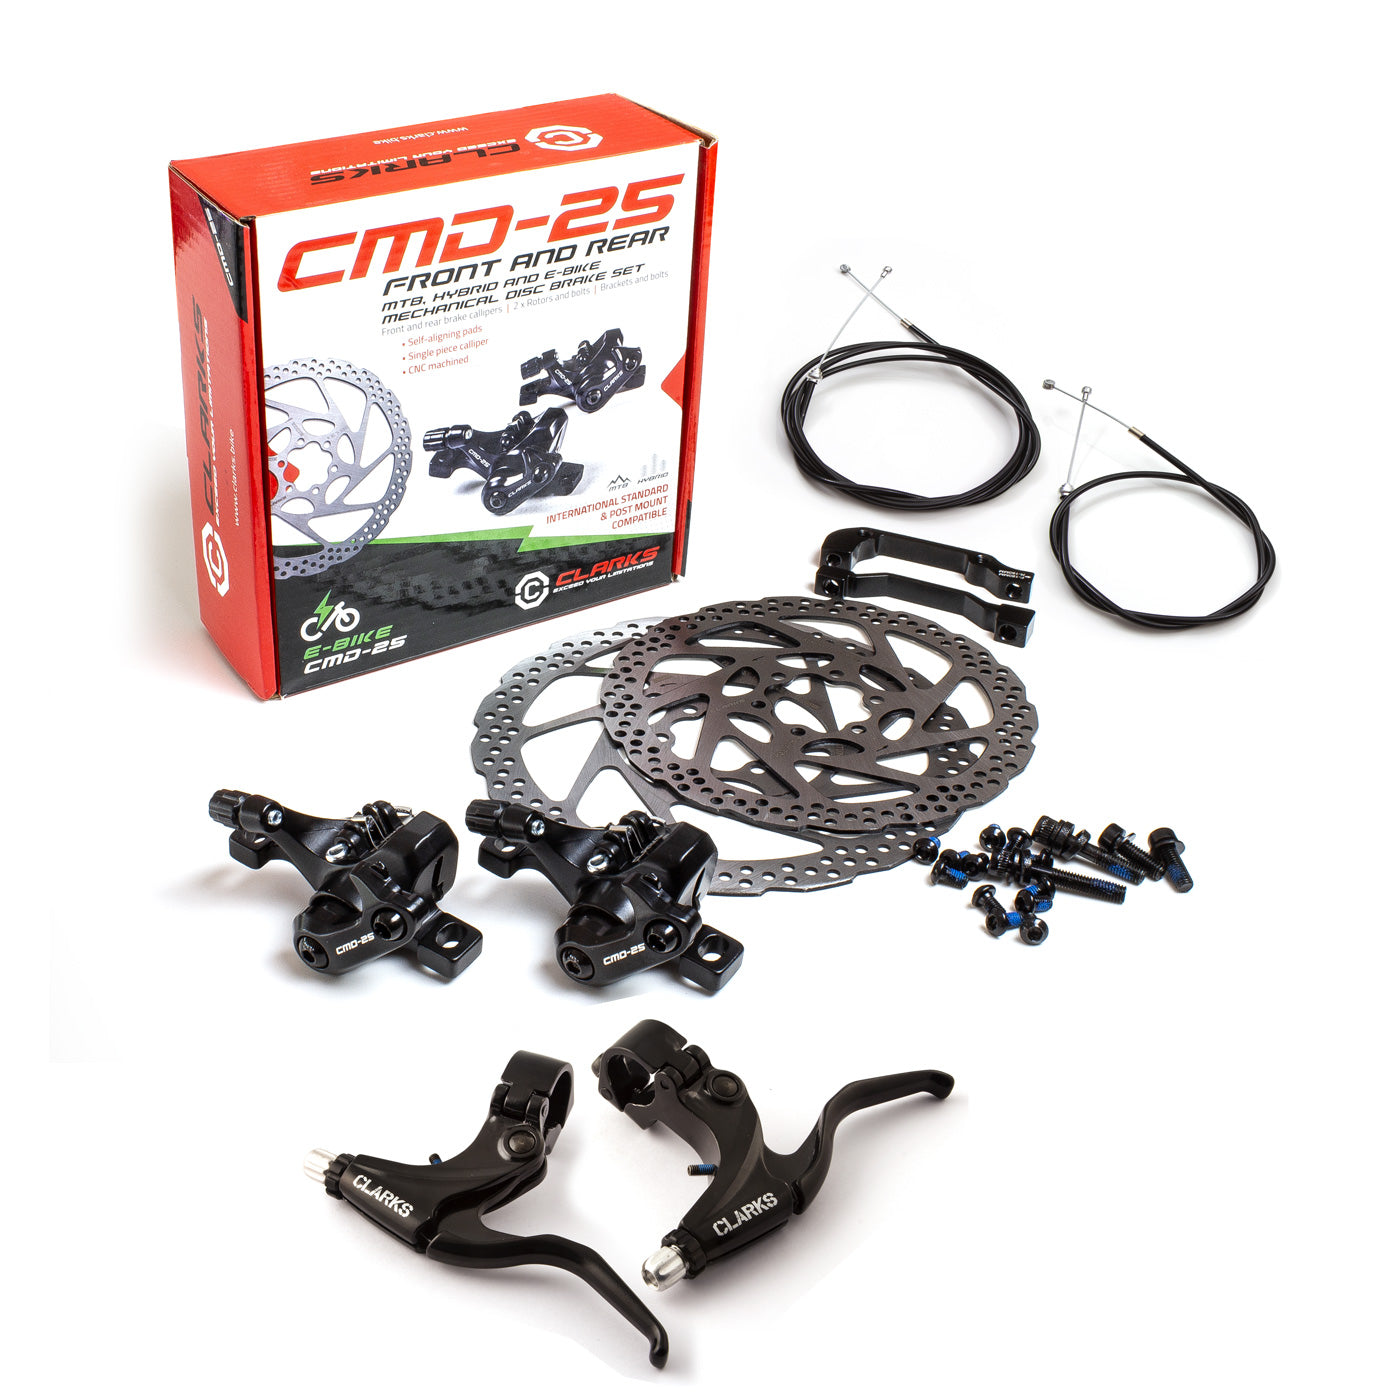 View CMD25 Mechanical Disc Brake Set Levers Cables information